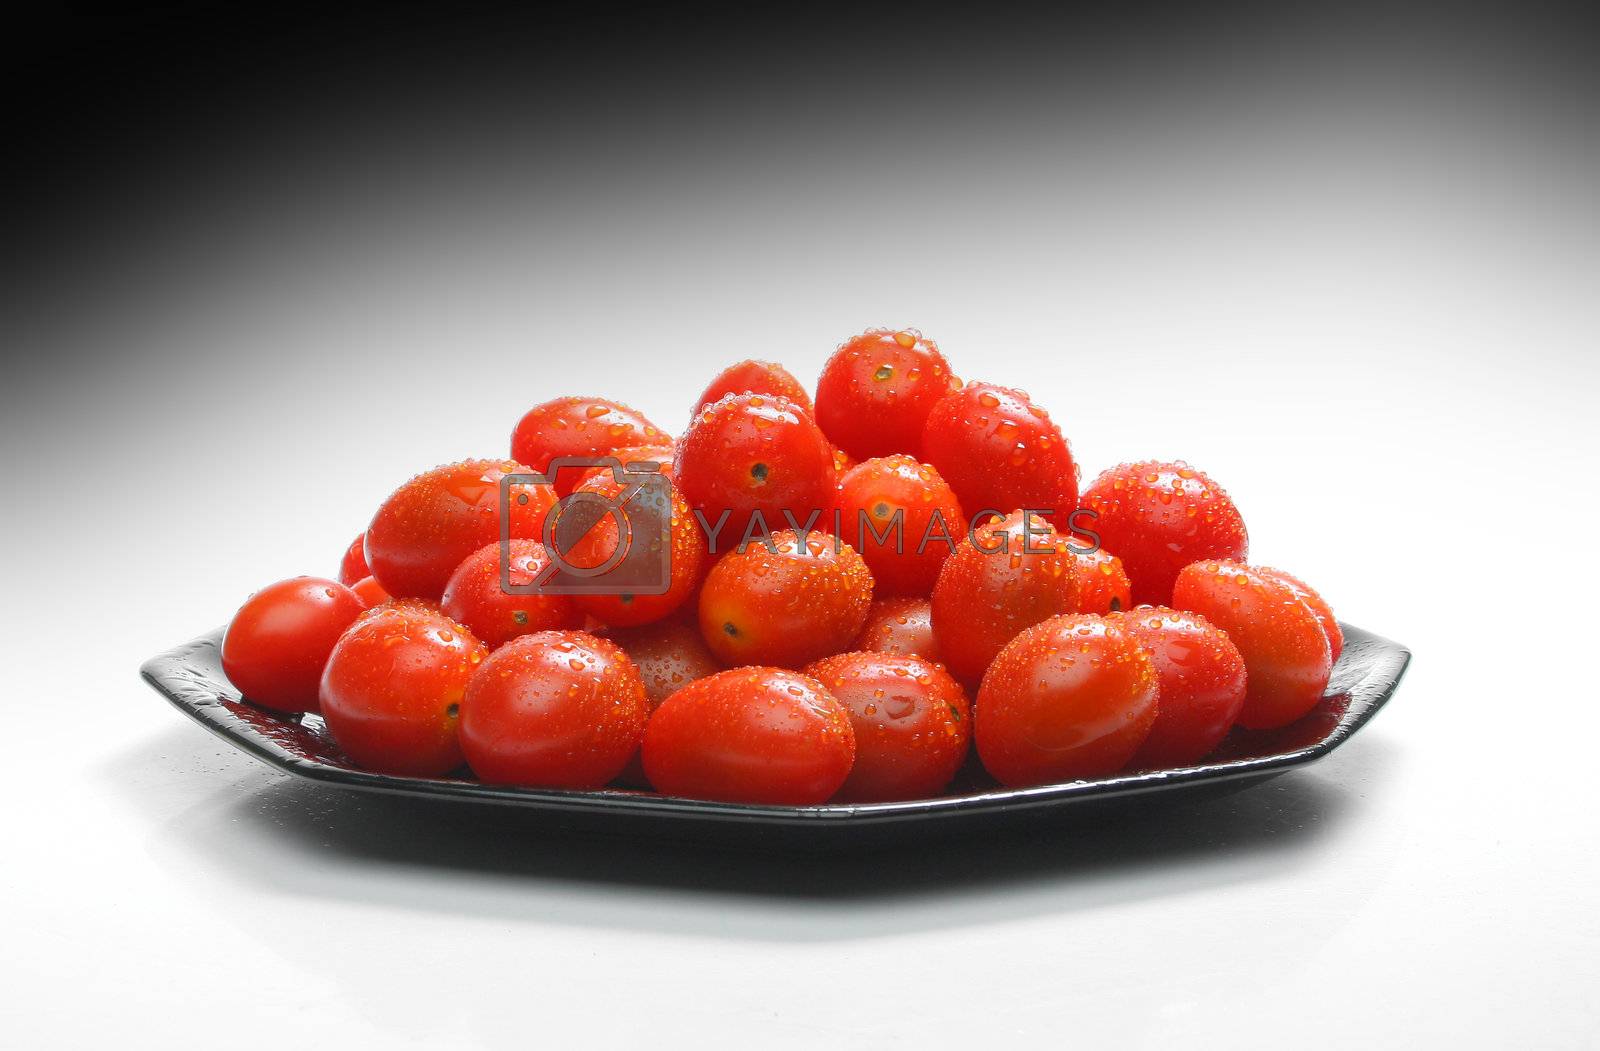 Royalty free image of Cherry tomatoes by Erdosain